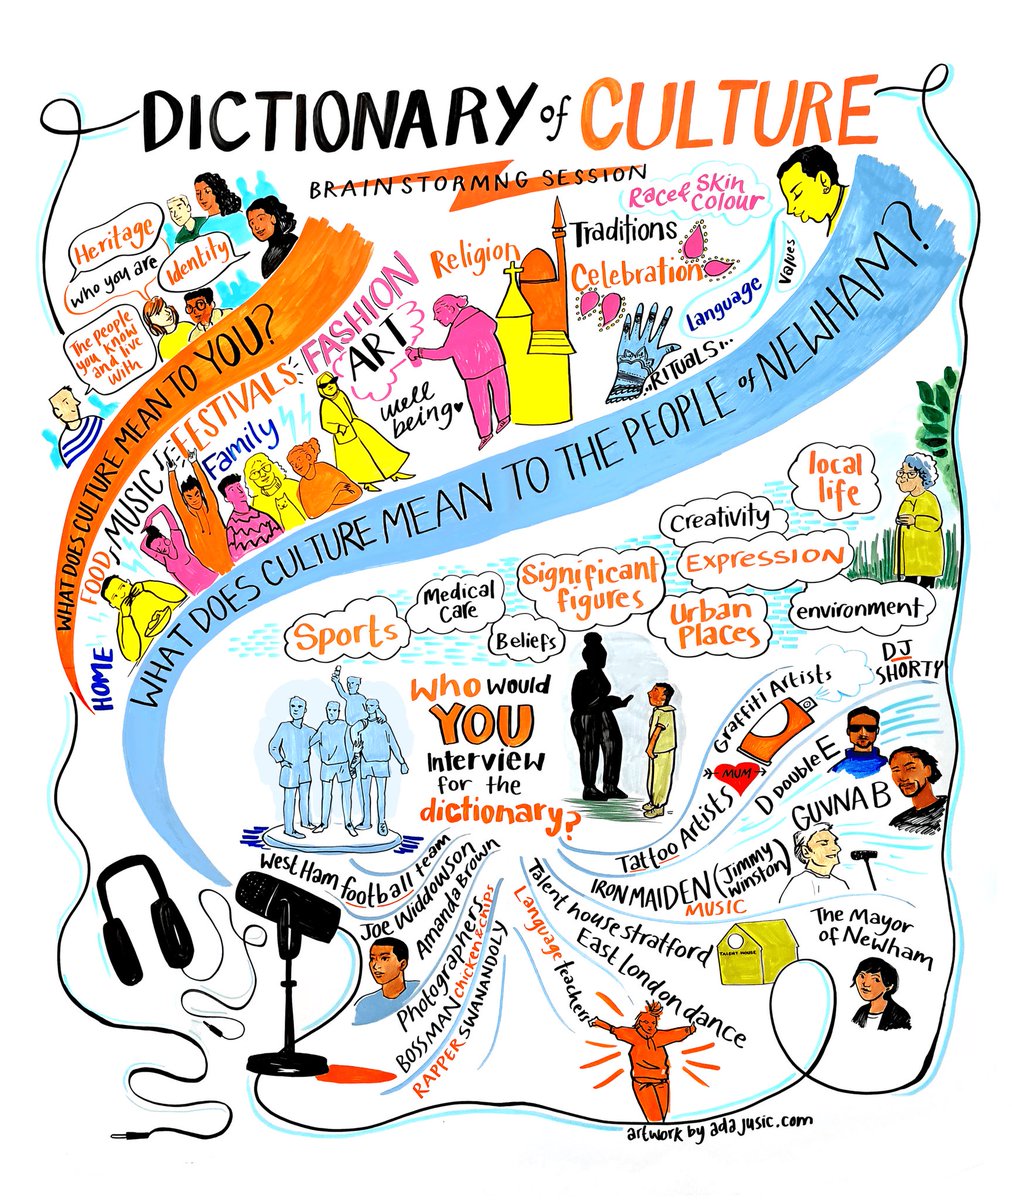 @ace_national Our young people are doing a phenomenal job at deciding what ‘culture’ really means in Newham. Artist @AdaJusic produced this record of their discussions about which words and speakers should be included in our Dictionary of Culture podcast with @Comm_Links. #CreateYourPlace